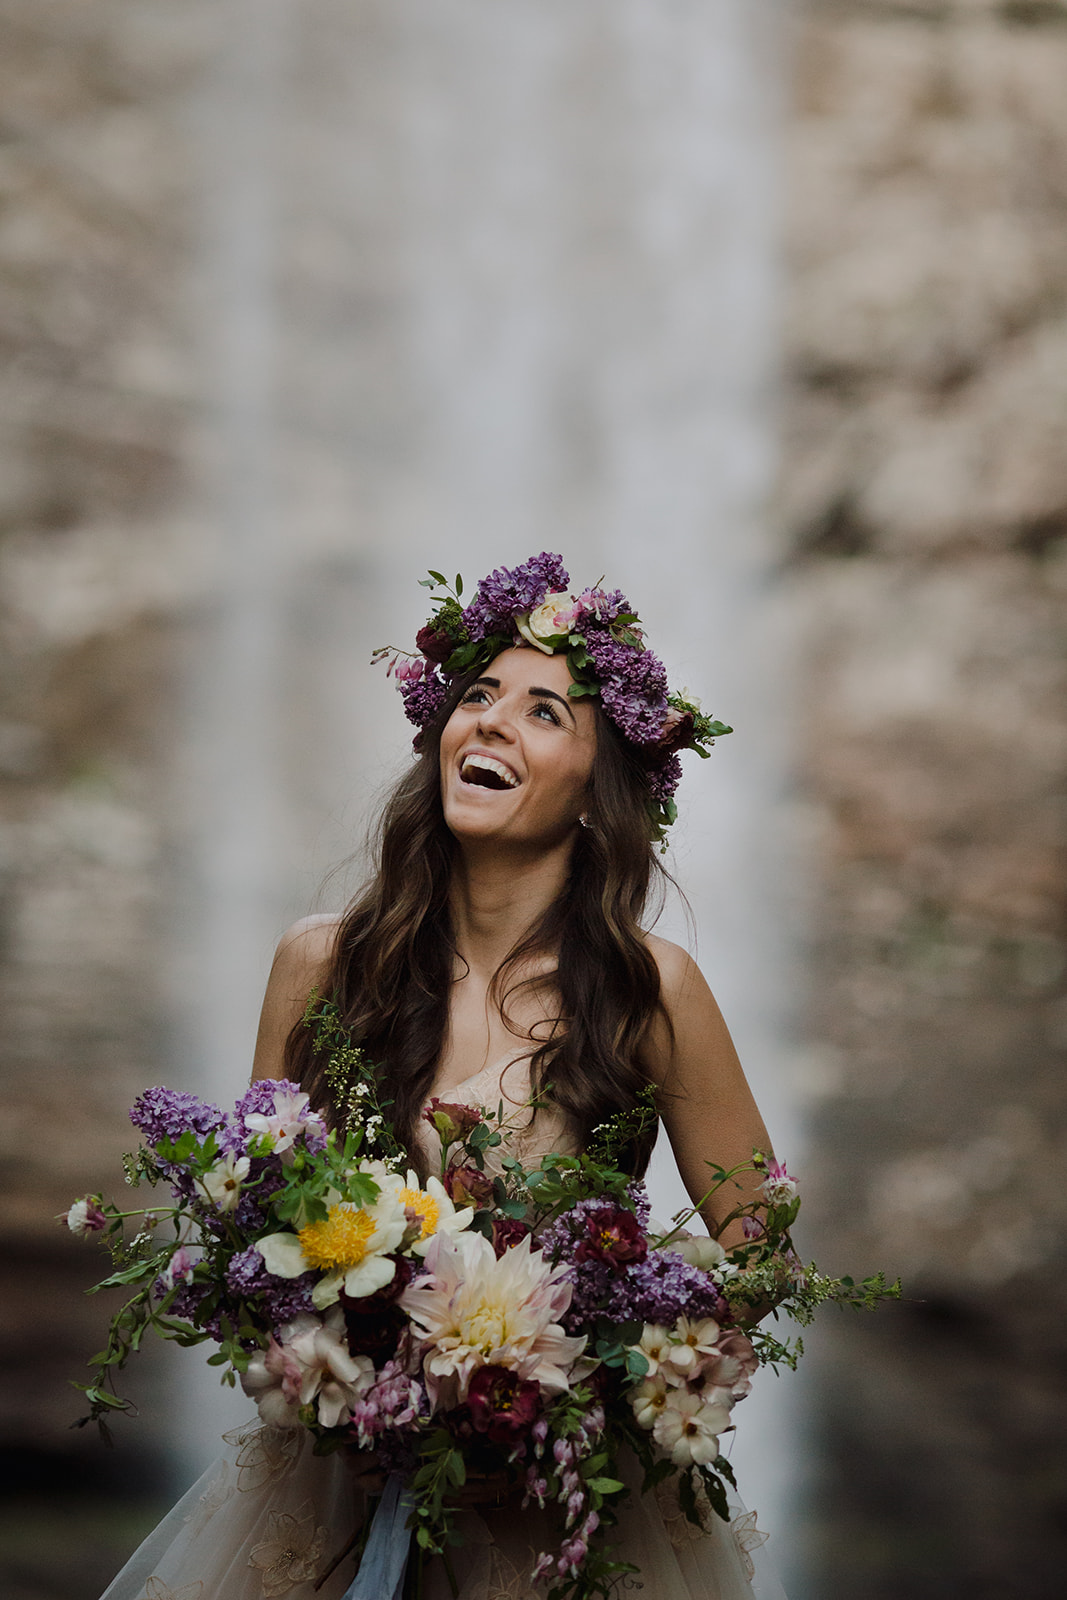 Lush bridal bouquet with lilac, peonies, cafe au lait dahlias, and butterfly ranunculus // Nashville Waterfall Elopement Floral Design